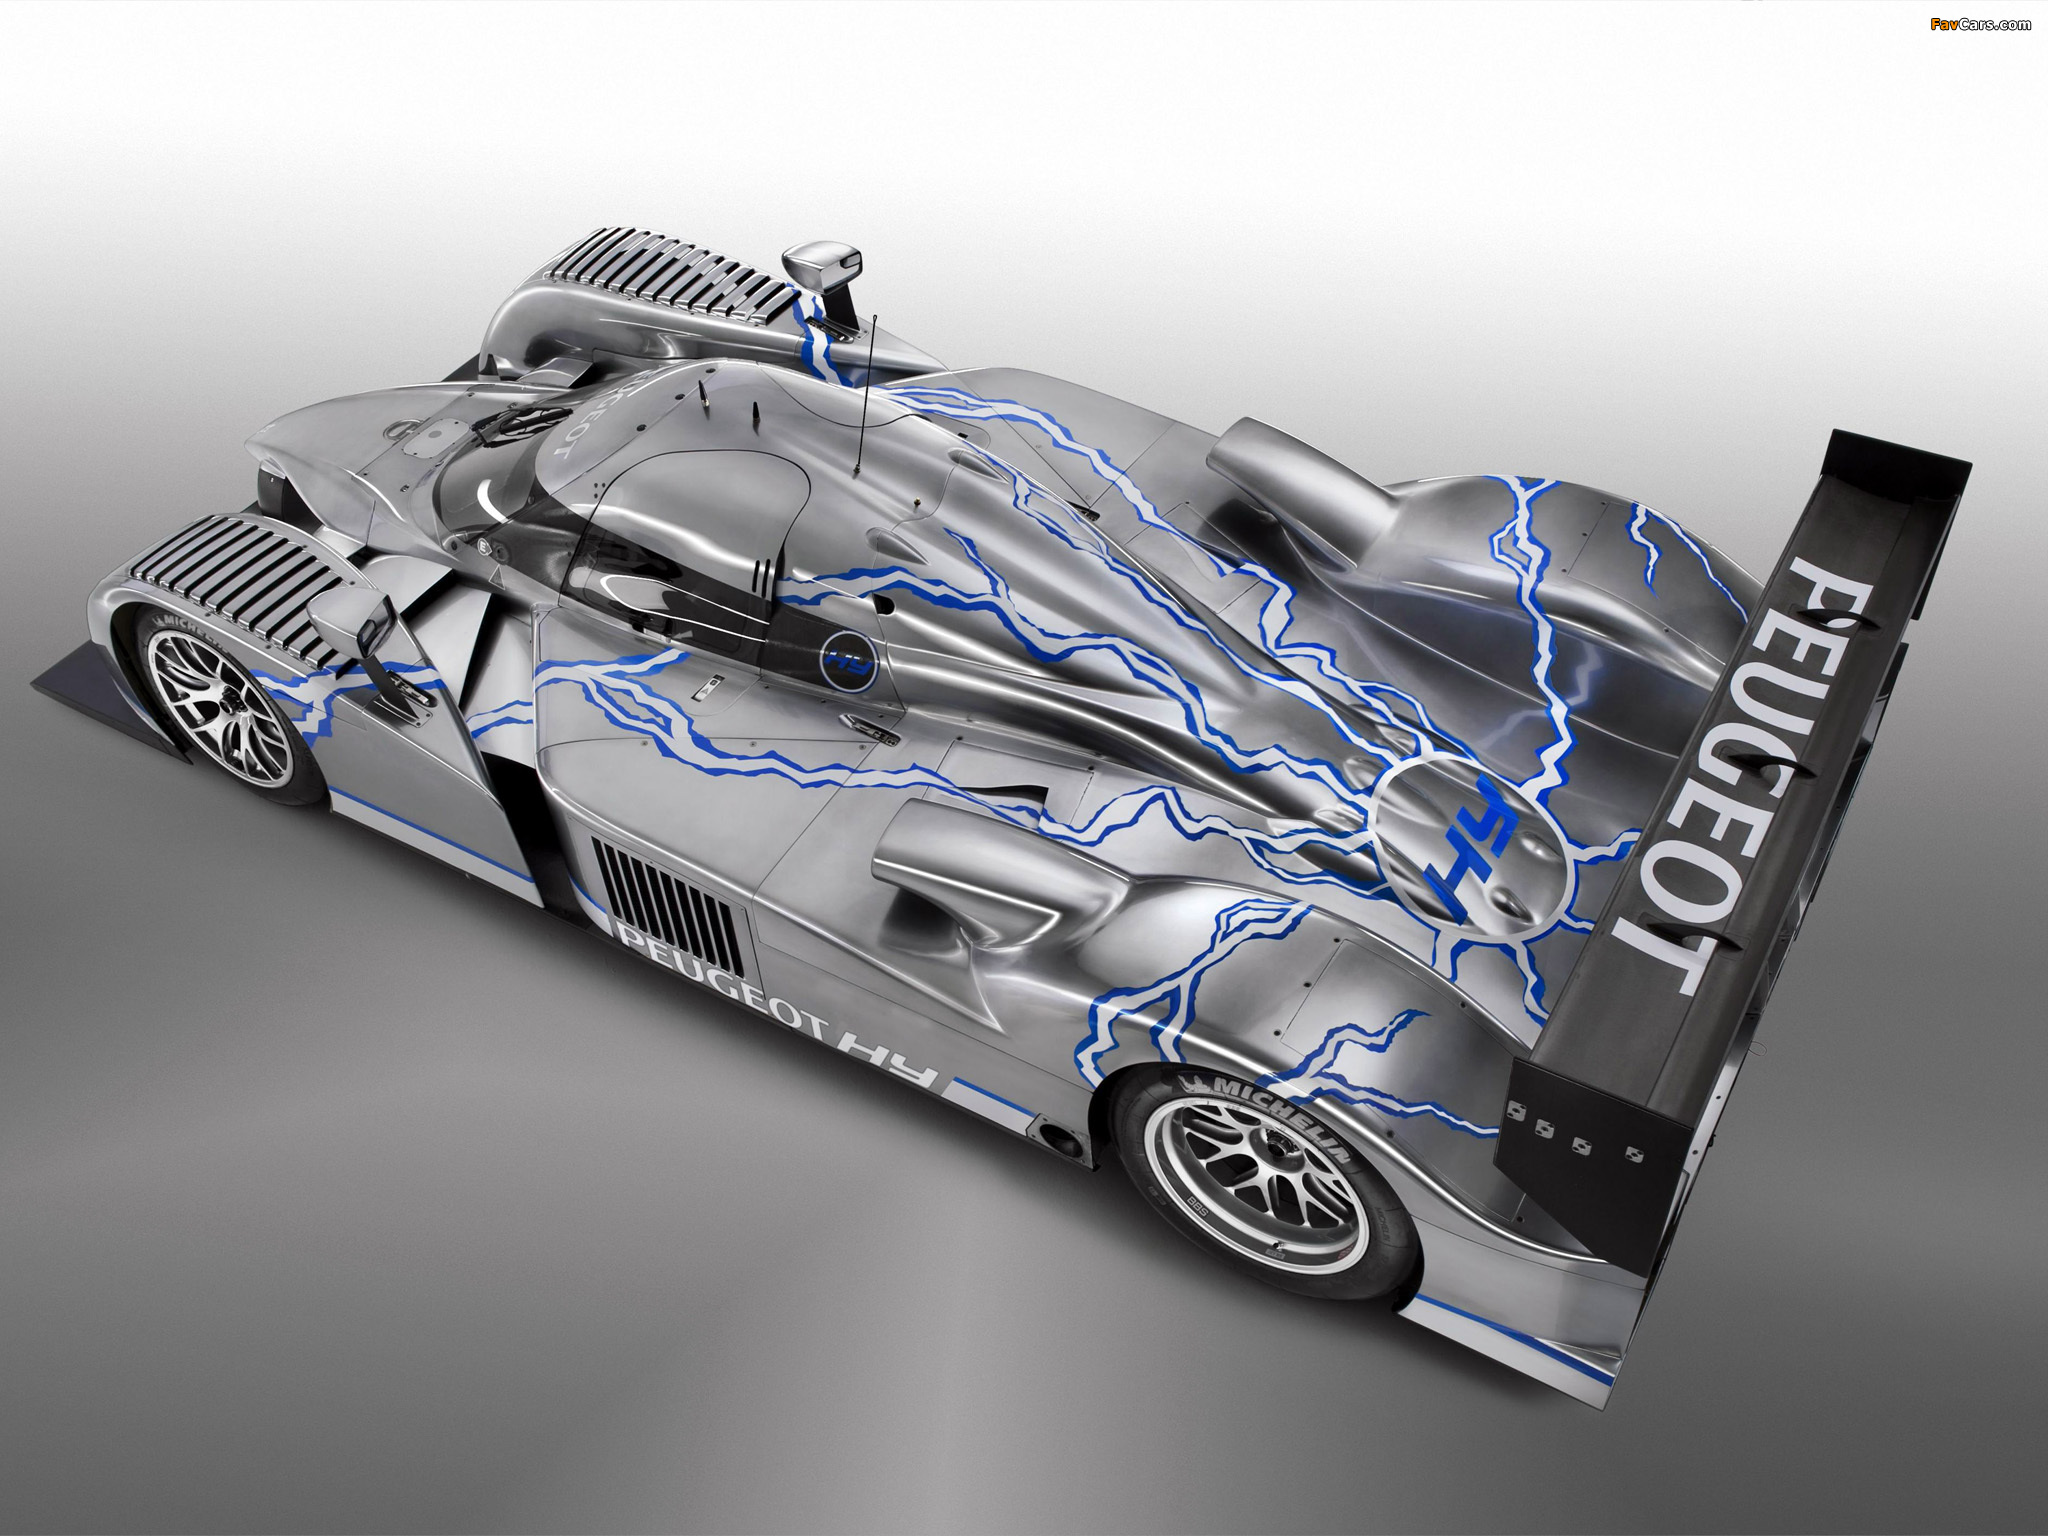 Photos of Peugeot 908 HY 2008 (2048 x 1536)